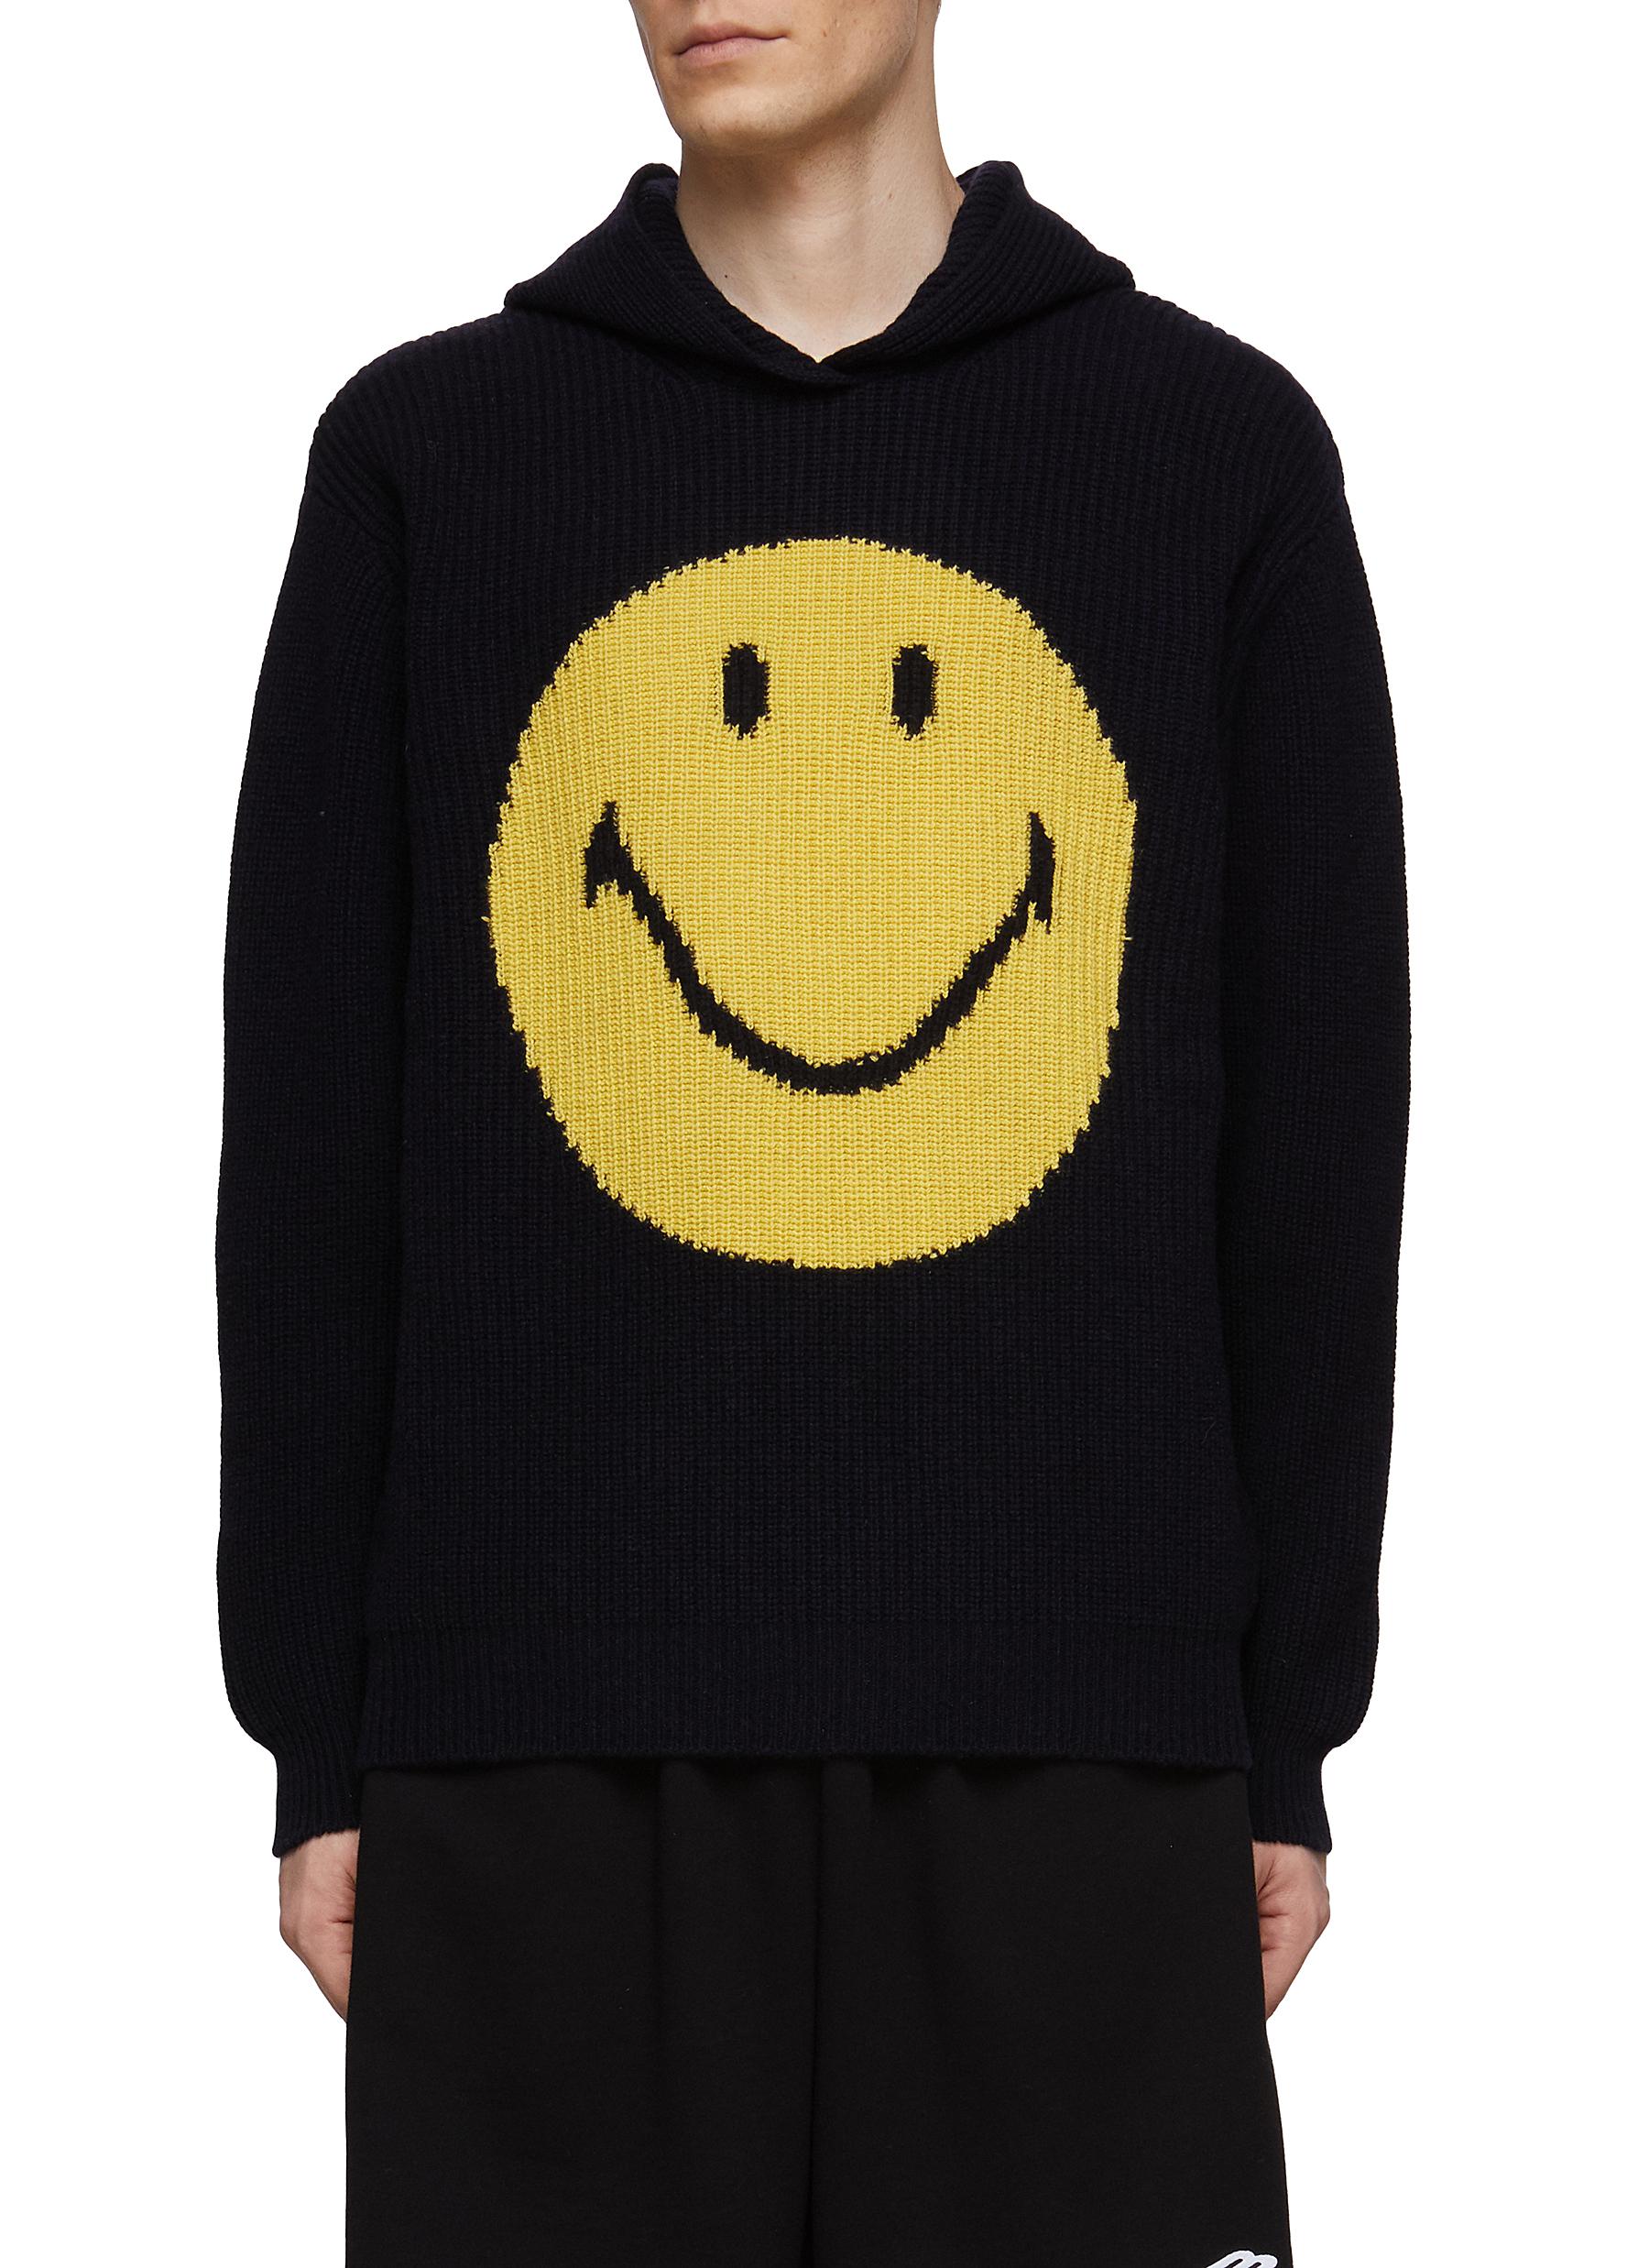 JOSHUA'S SMILEY FACE INTARSIA WOOL CASHMERE BLEND KNIT HOODIE